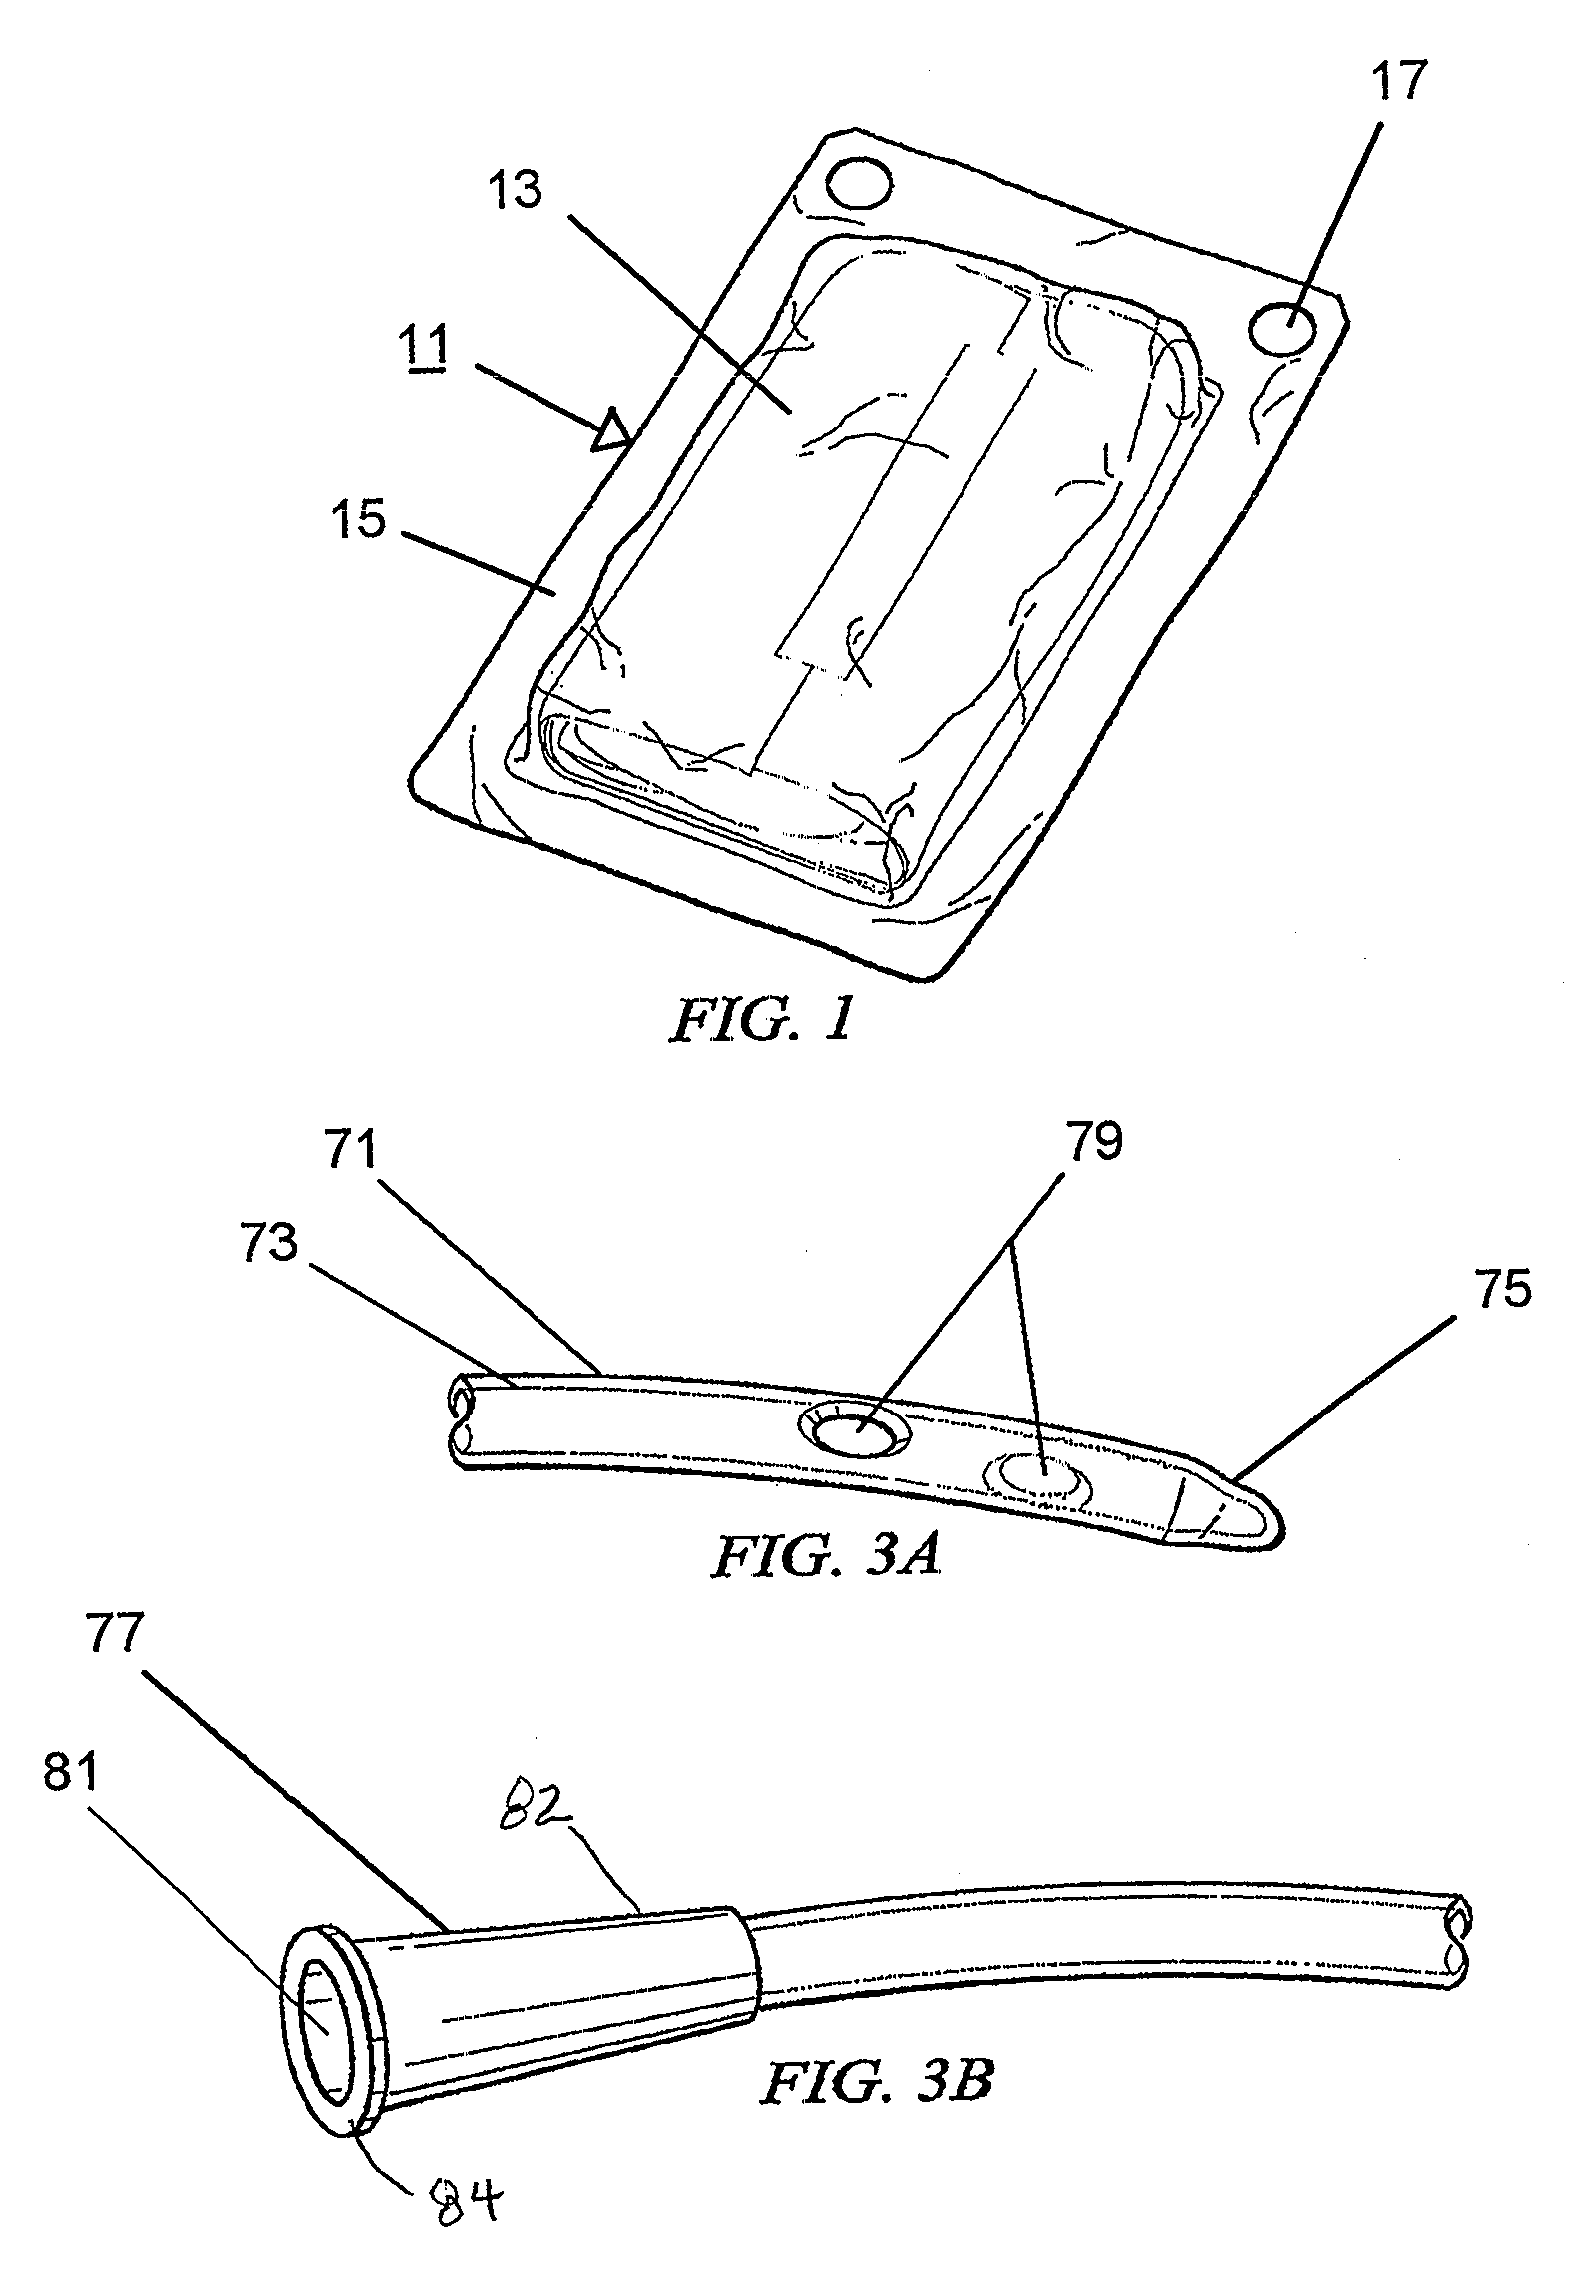 Urinary catheter, catheter packaging assembly and method of use